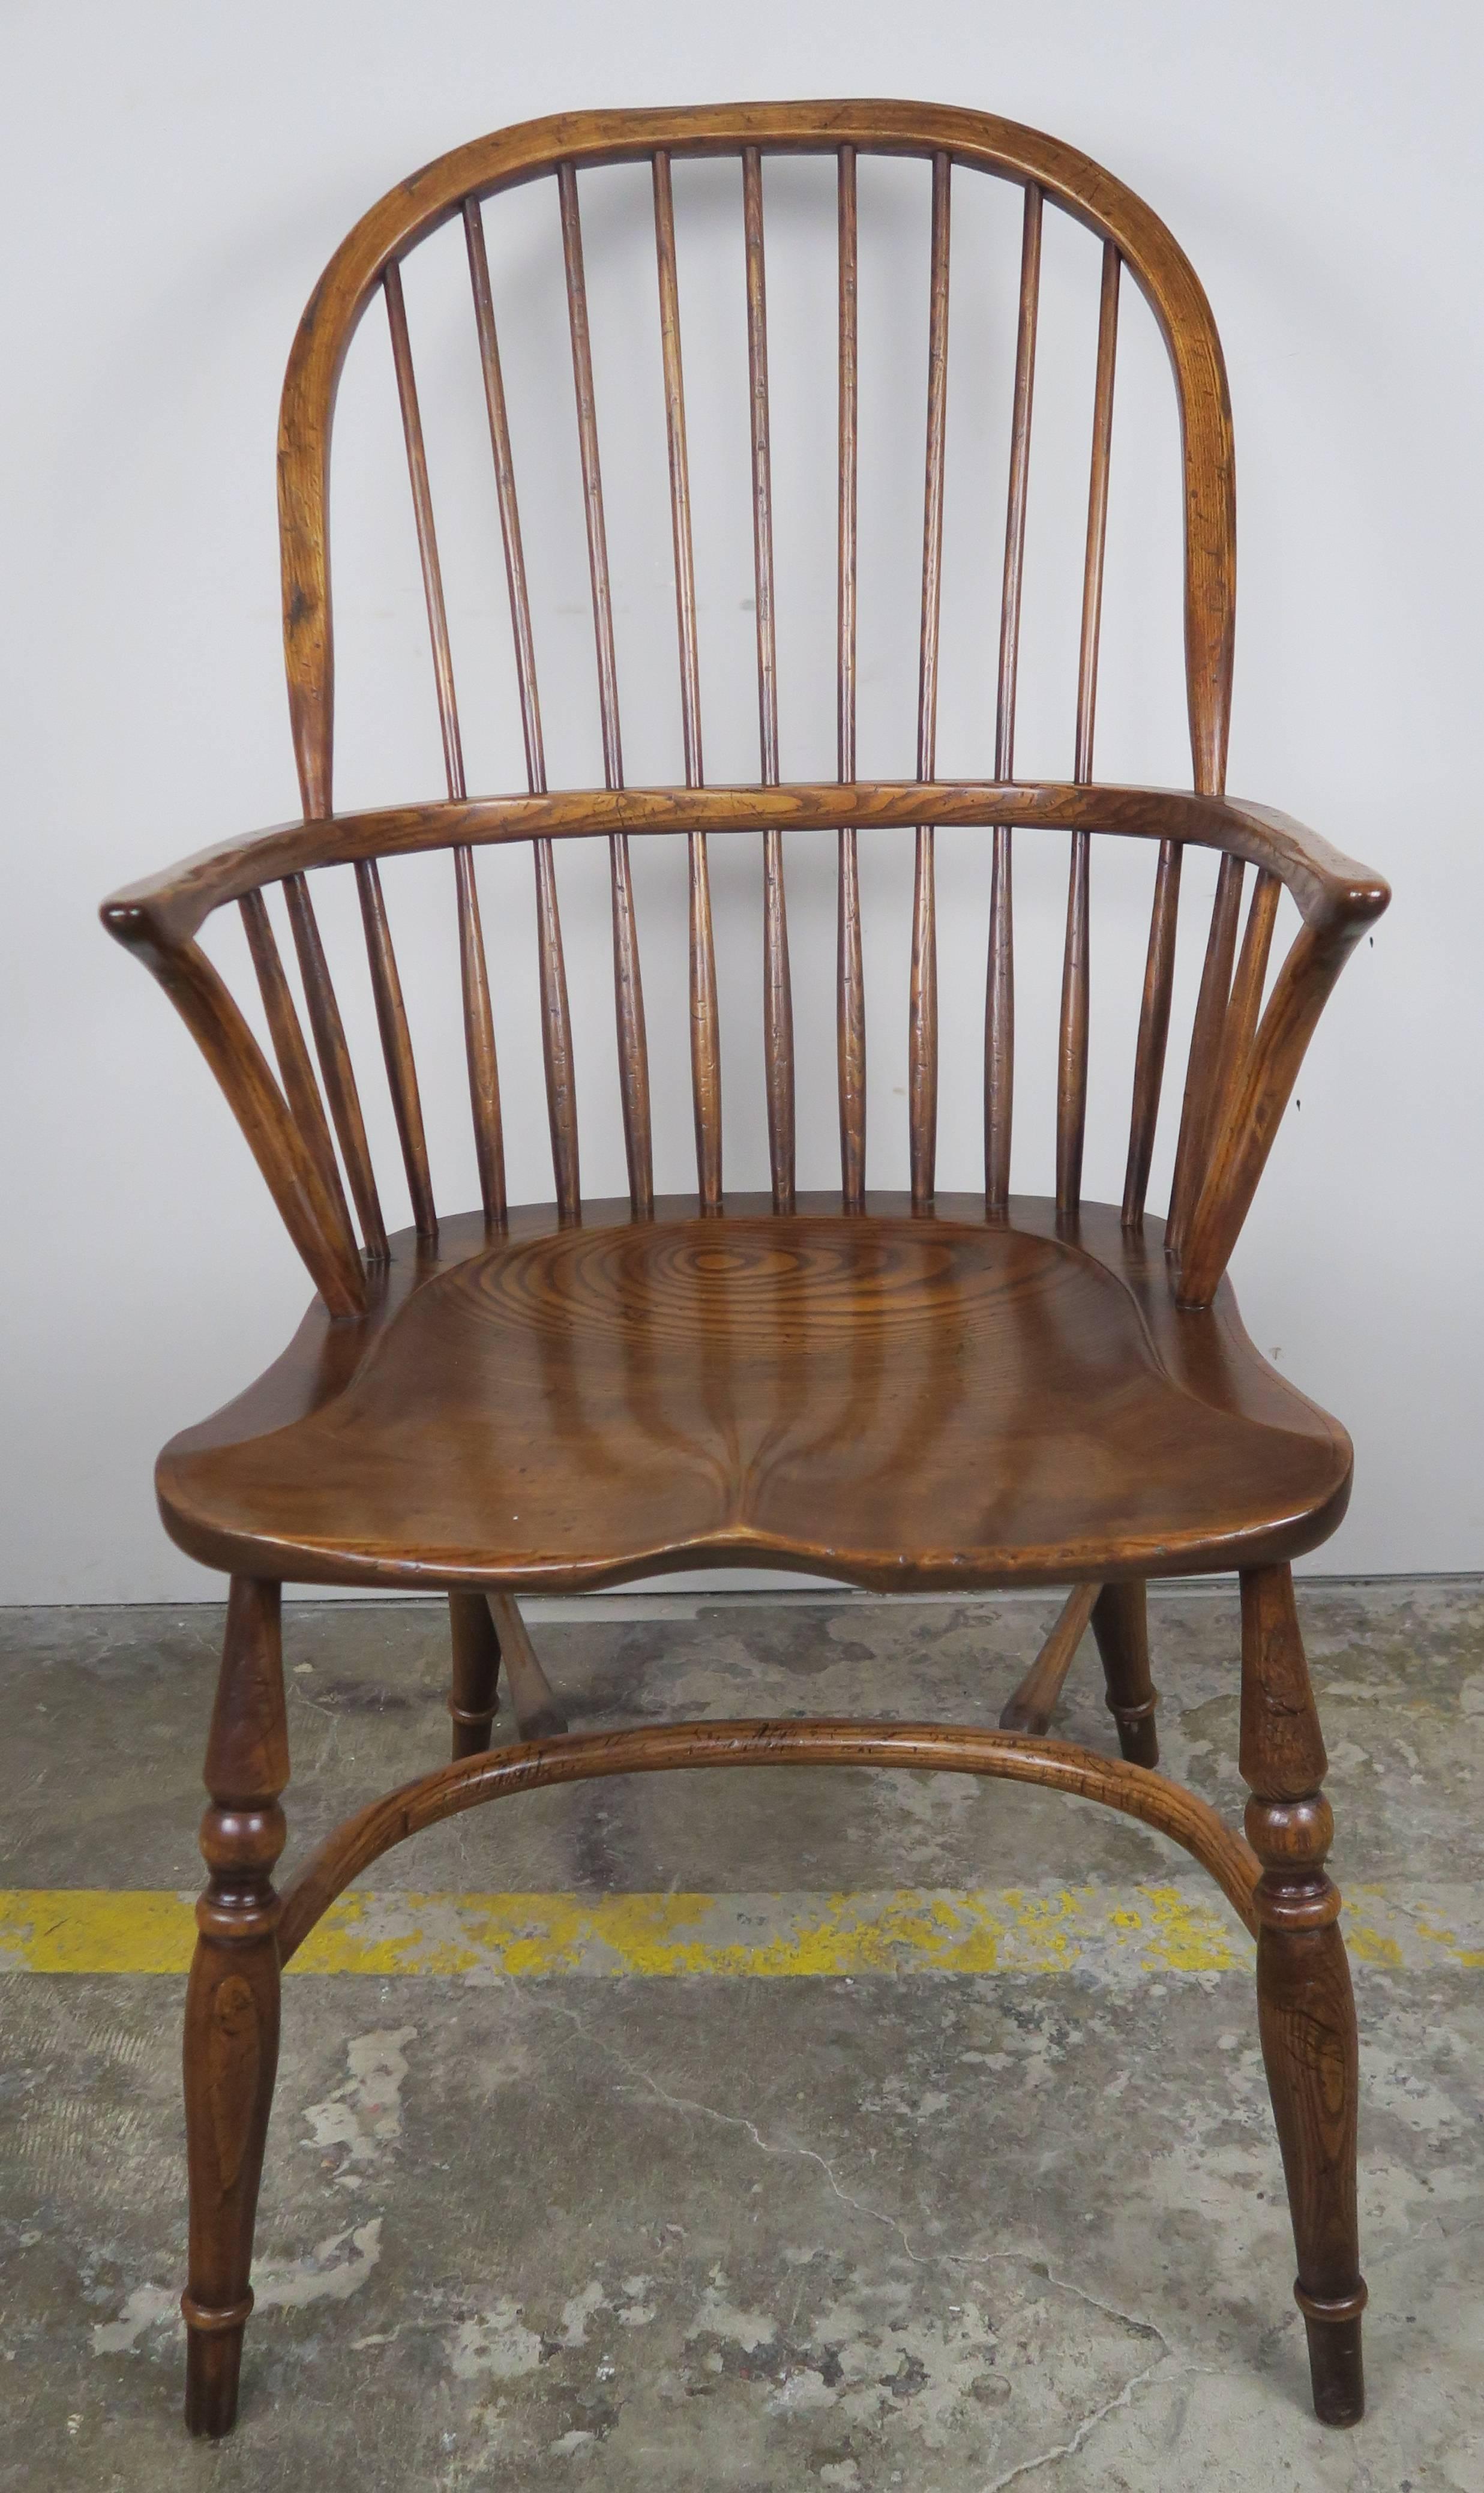 Set of eight American elmwood high bow-backed Windsor armchairs with exaggerated saddle seats and beautiful turned legs. The chairs include eight envelope filled seat cushions upholstered in a rust colored chenille textile.